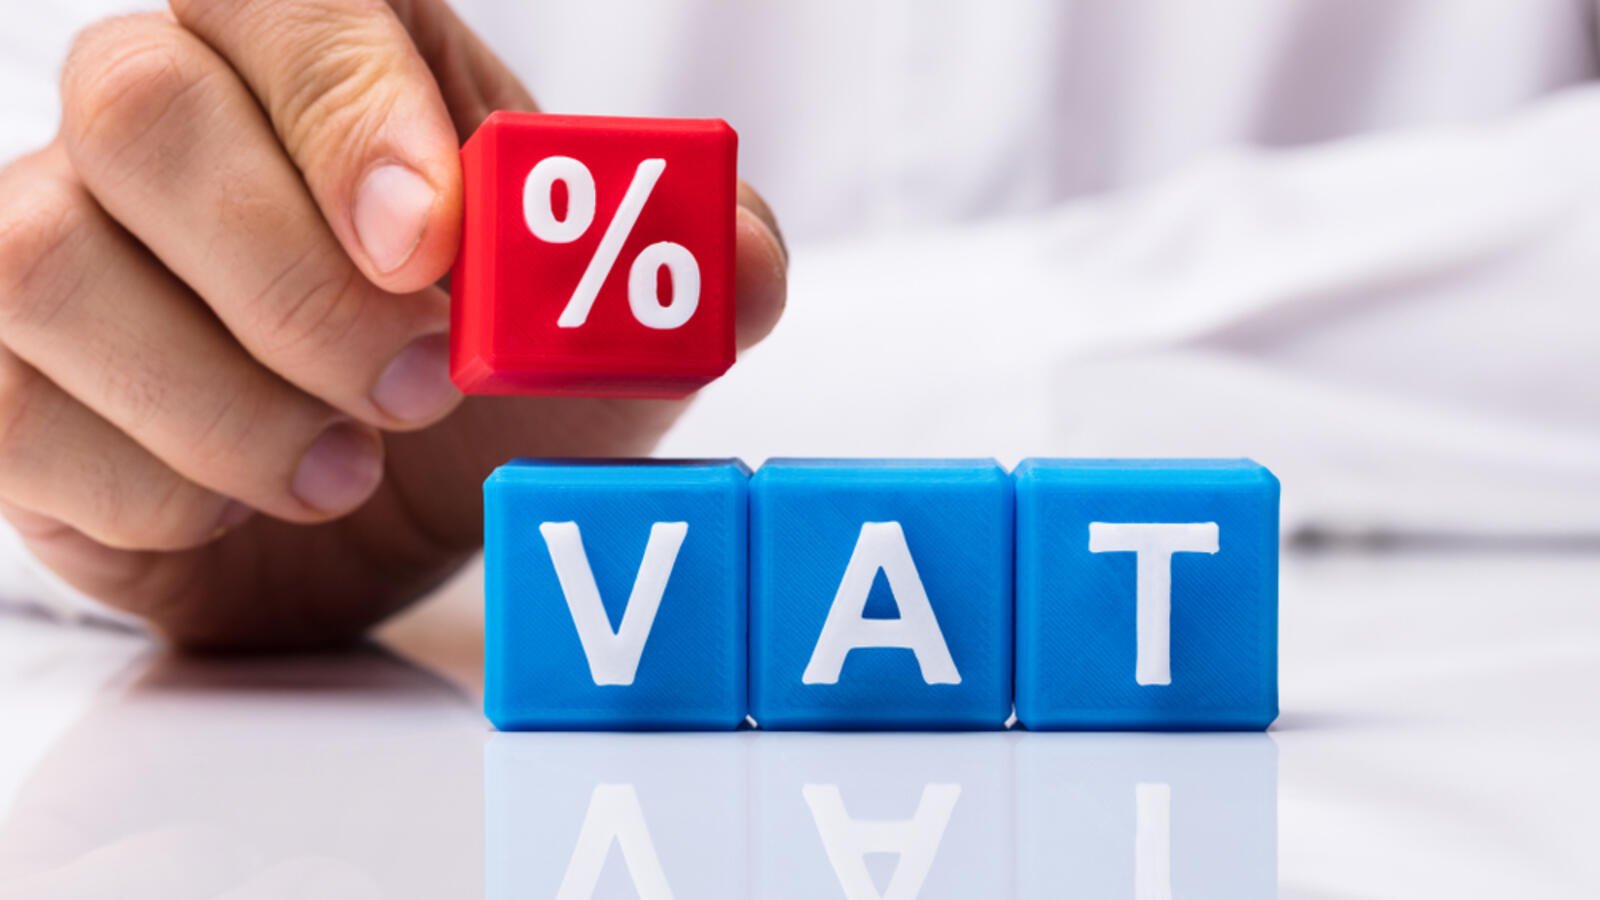 vat-services-accountancy-services-mbl-accounting